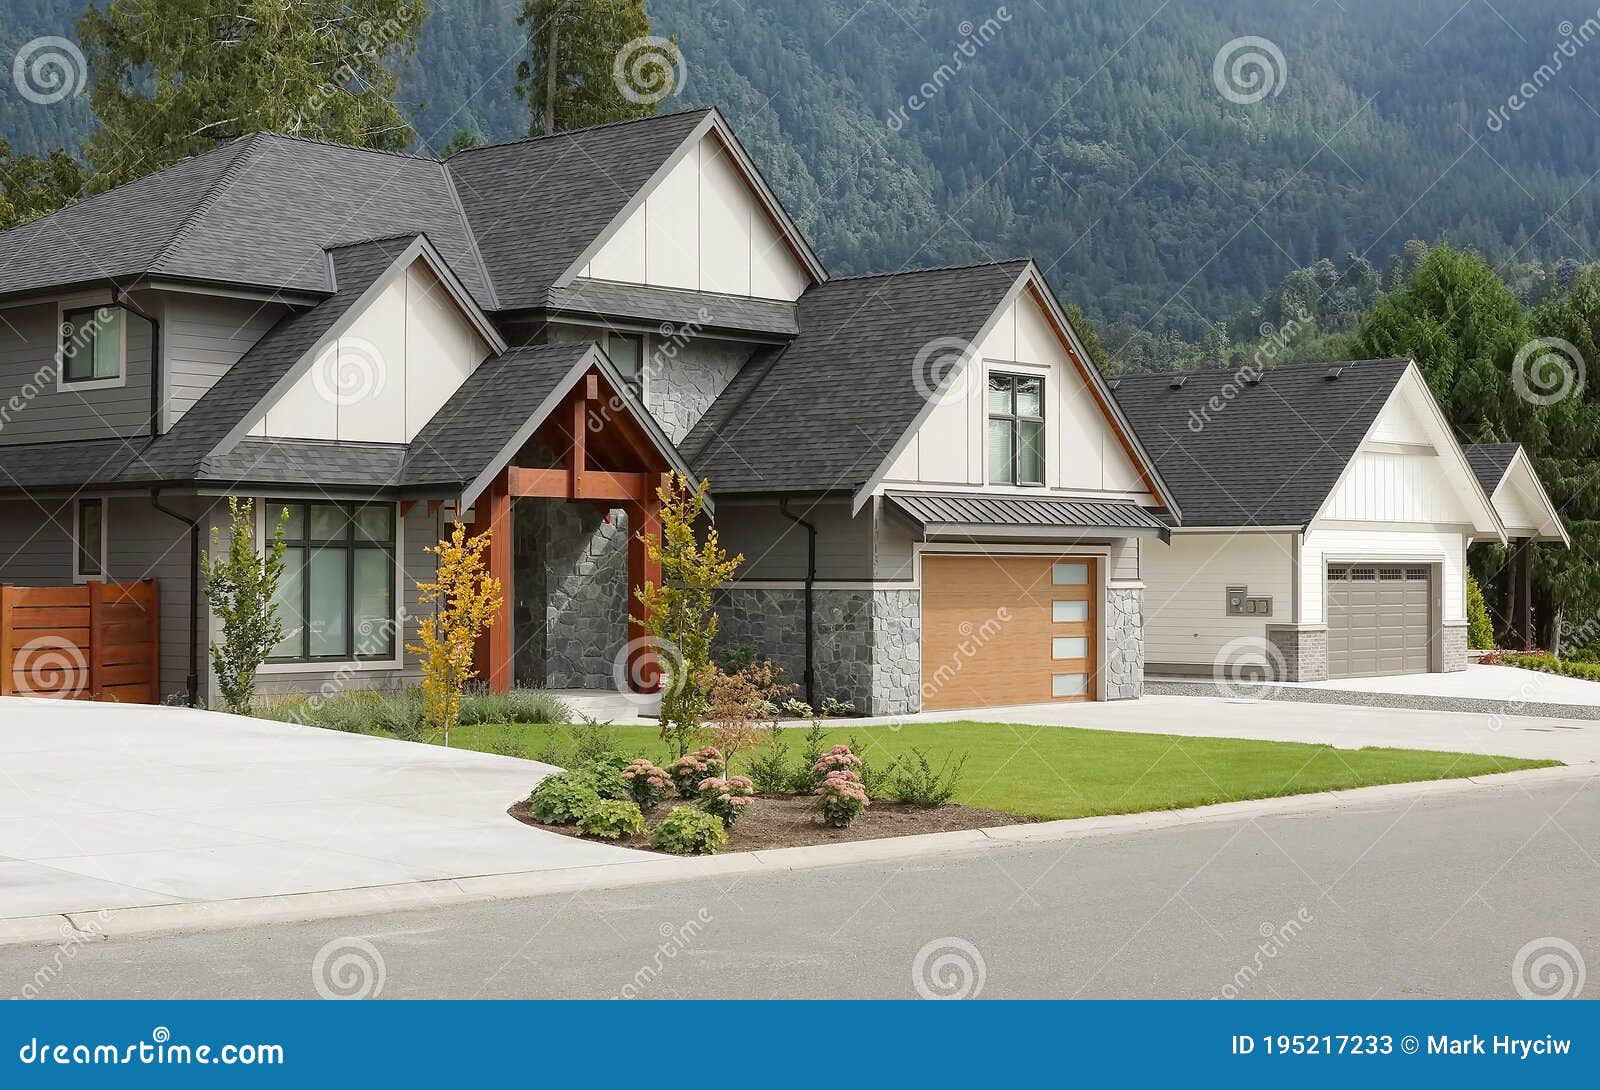 new custom exterior residential houses homes for sale in canada